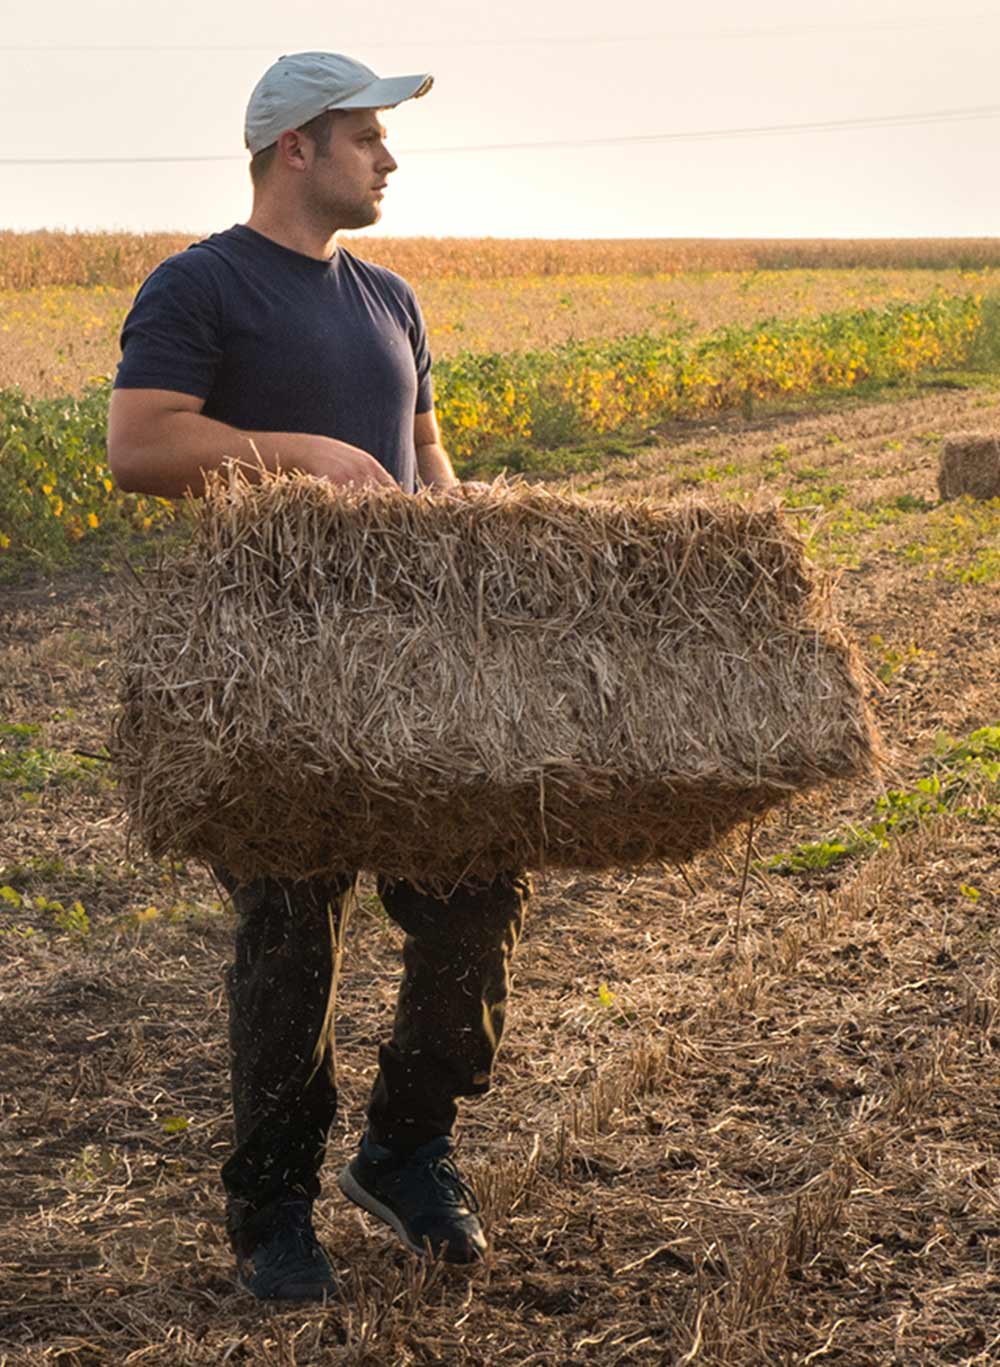 Carrying a hay bale